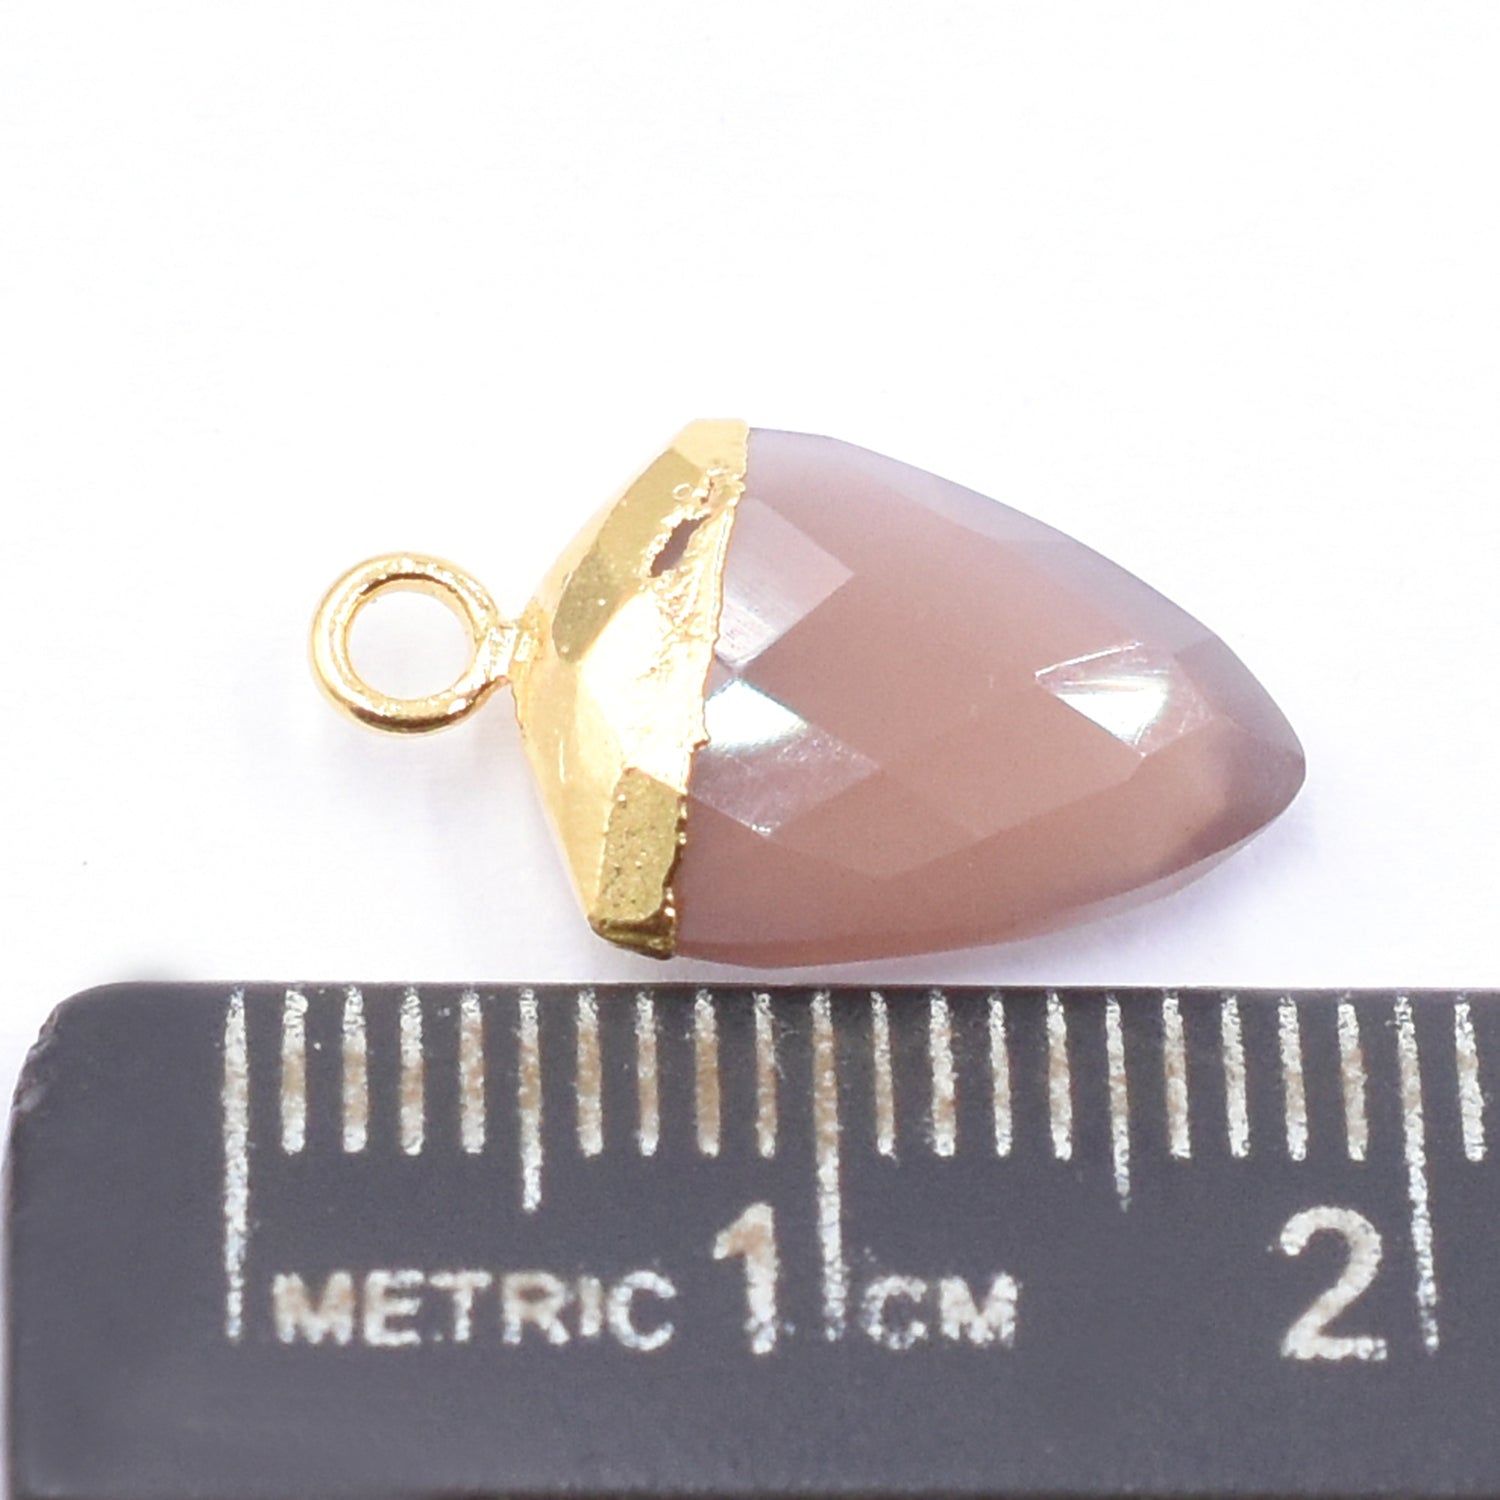 Brown Chocolate Moonstone 13X10 MM Shield Shape Gold Electroplated Pendant ( Set Of 2 Pcs)